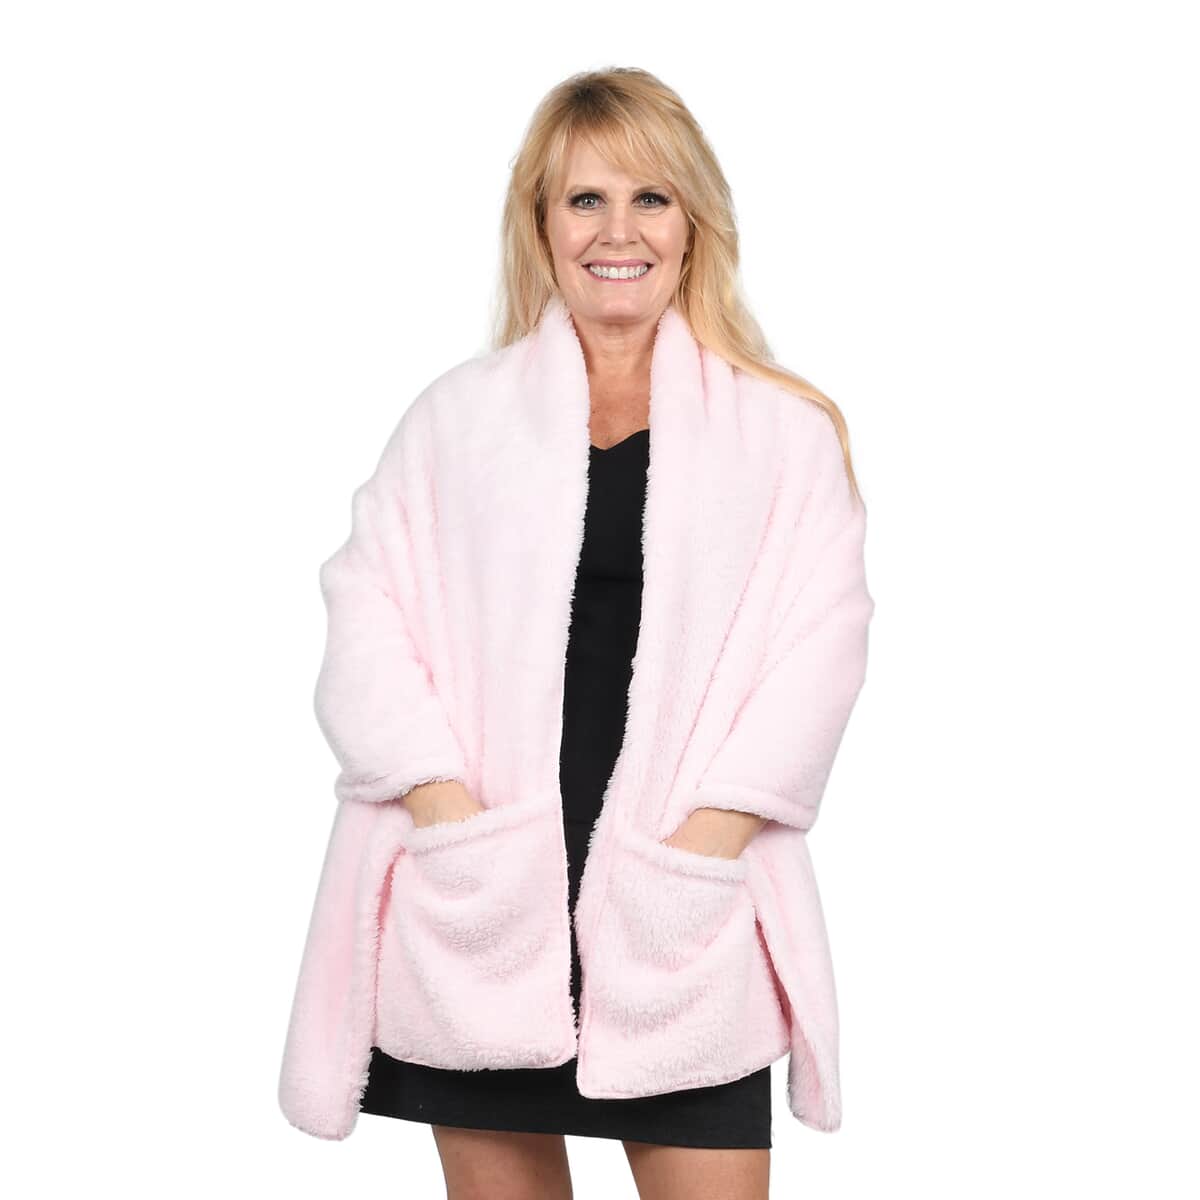 Social Grace Convertible Pink Travel Blanket Wrap with Pockets image number 0